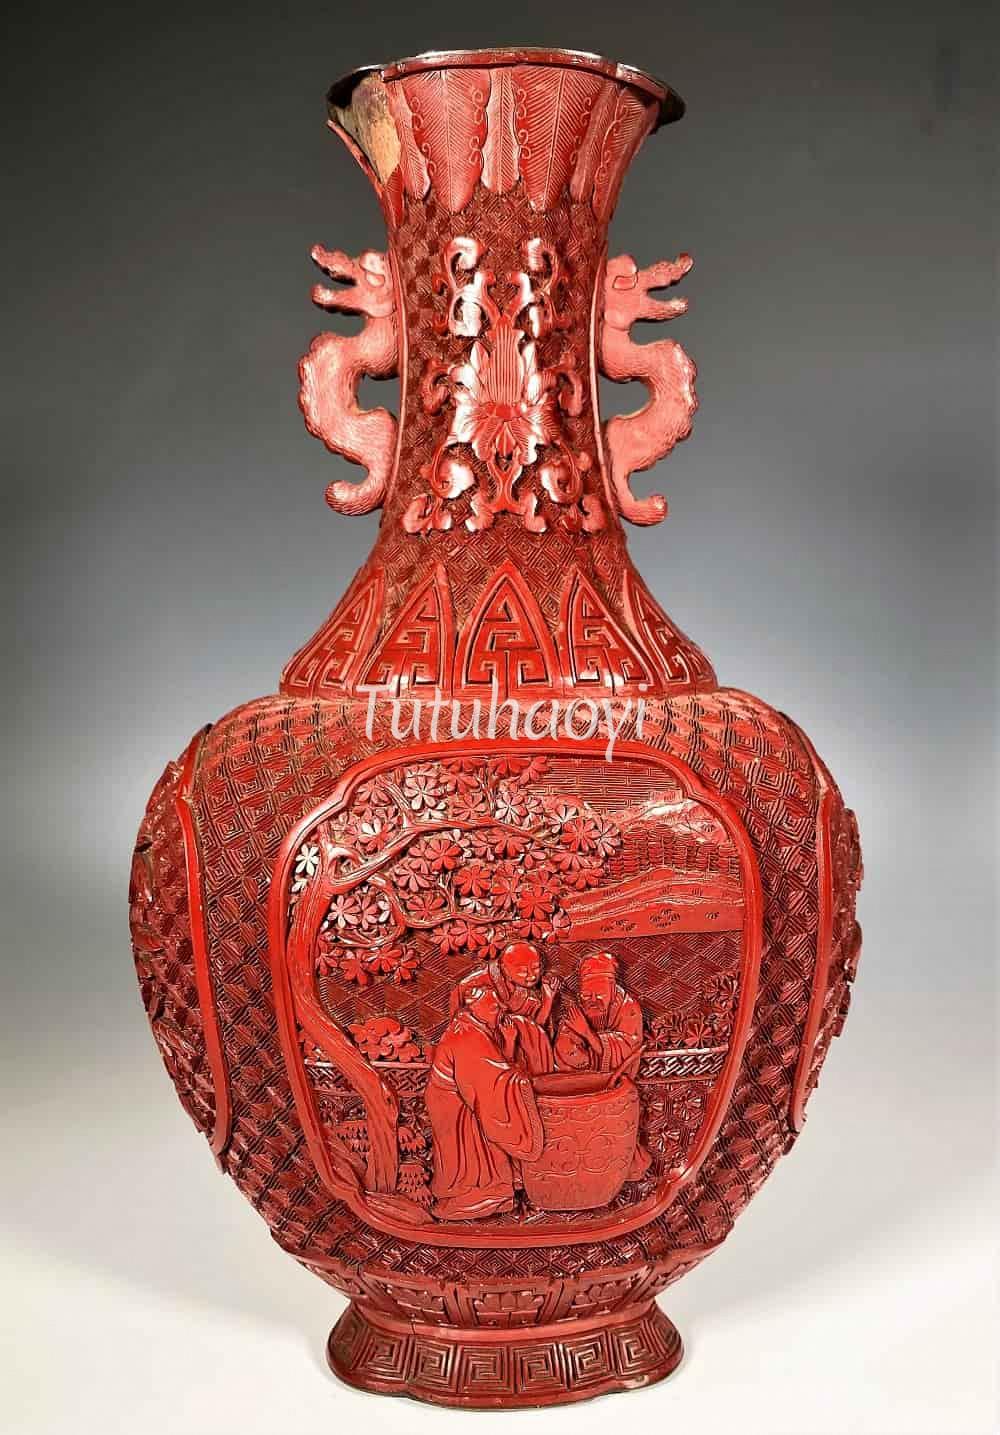 carved lacquer ware painted with San Suan Tu 三酸图